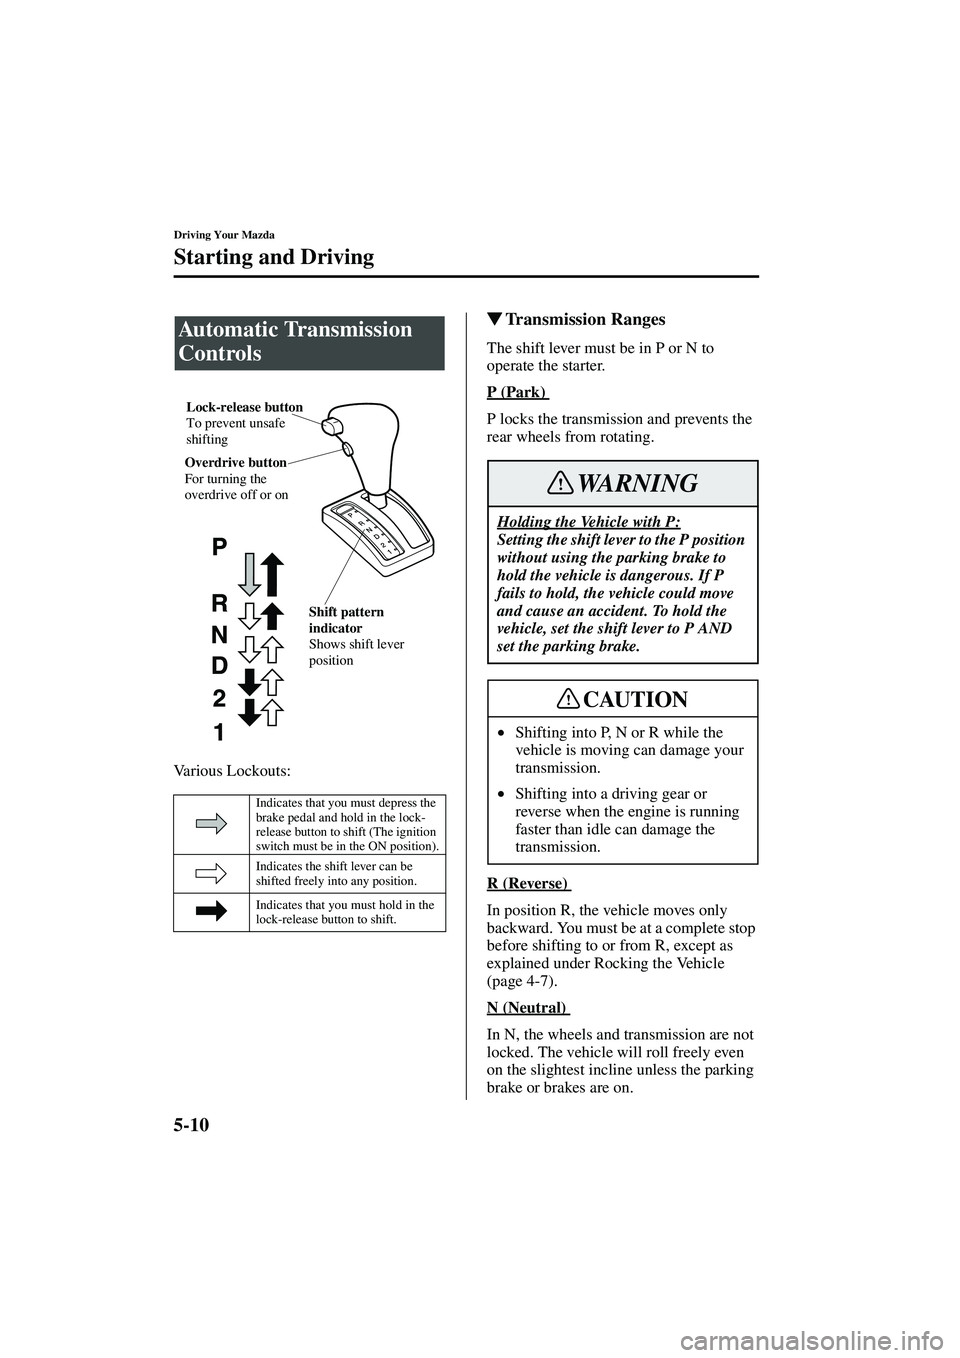 MAZDA MODEL MX-5 MIATA 2003  Owners Manual 5-10
Driving Your Mazda
Starting and Driving
Form No. 8R09-EA-02G
Various Lockouts:
Transmission Ranges
The shift lever must be in P or N to 
operate the starter.
P (Park) 
P locks the transmission a